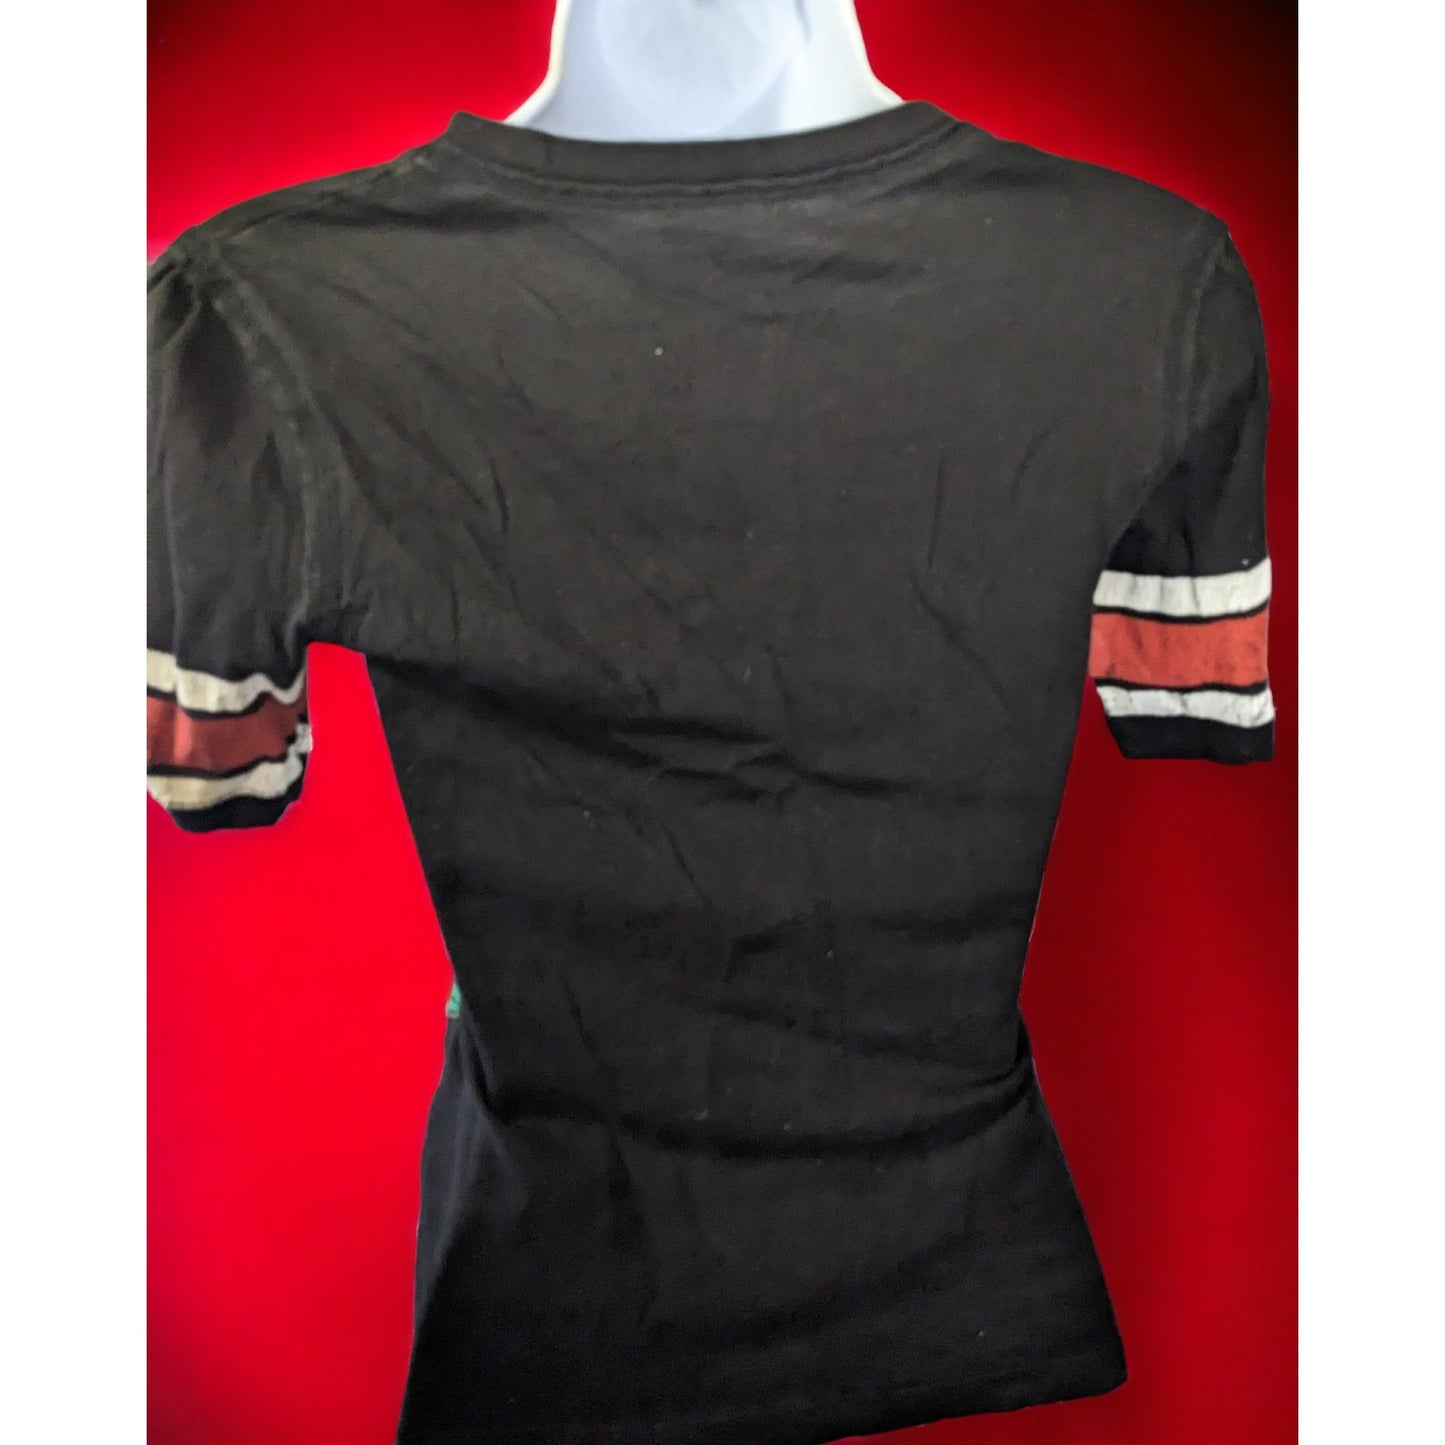 Betty Boop Sports Style Distressed Tee